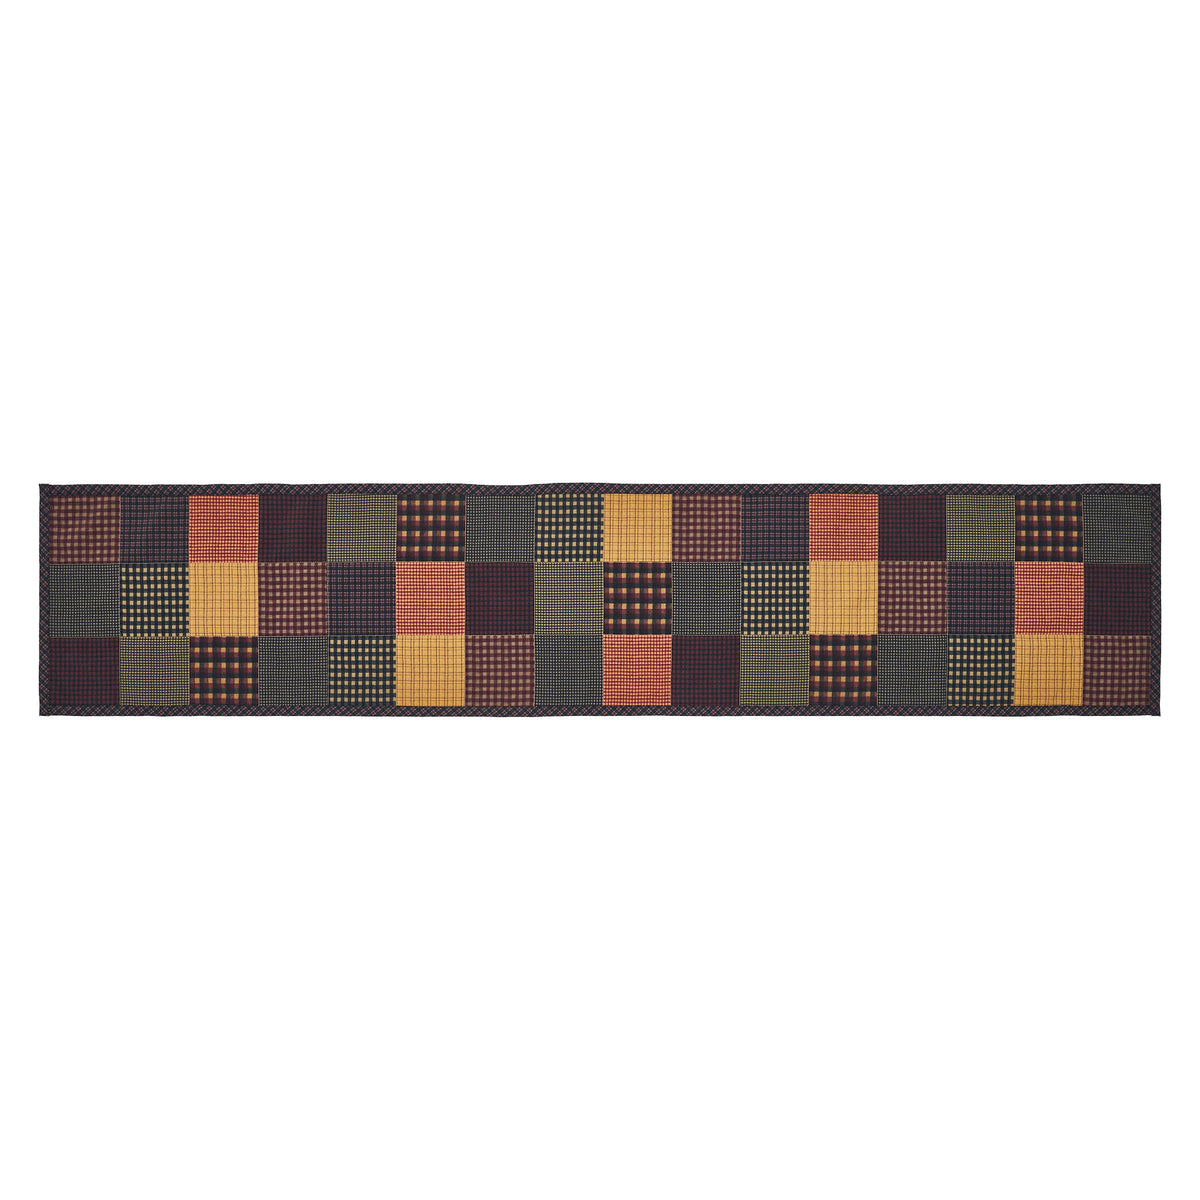 Heritage Farms Quilted Runner 12x60